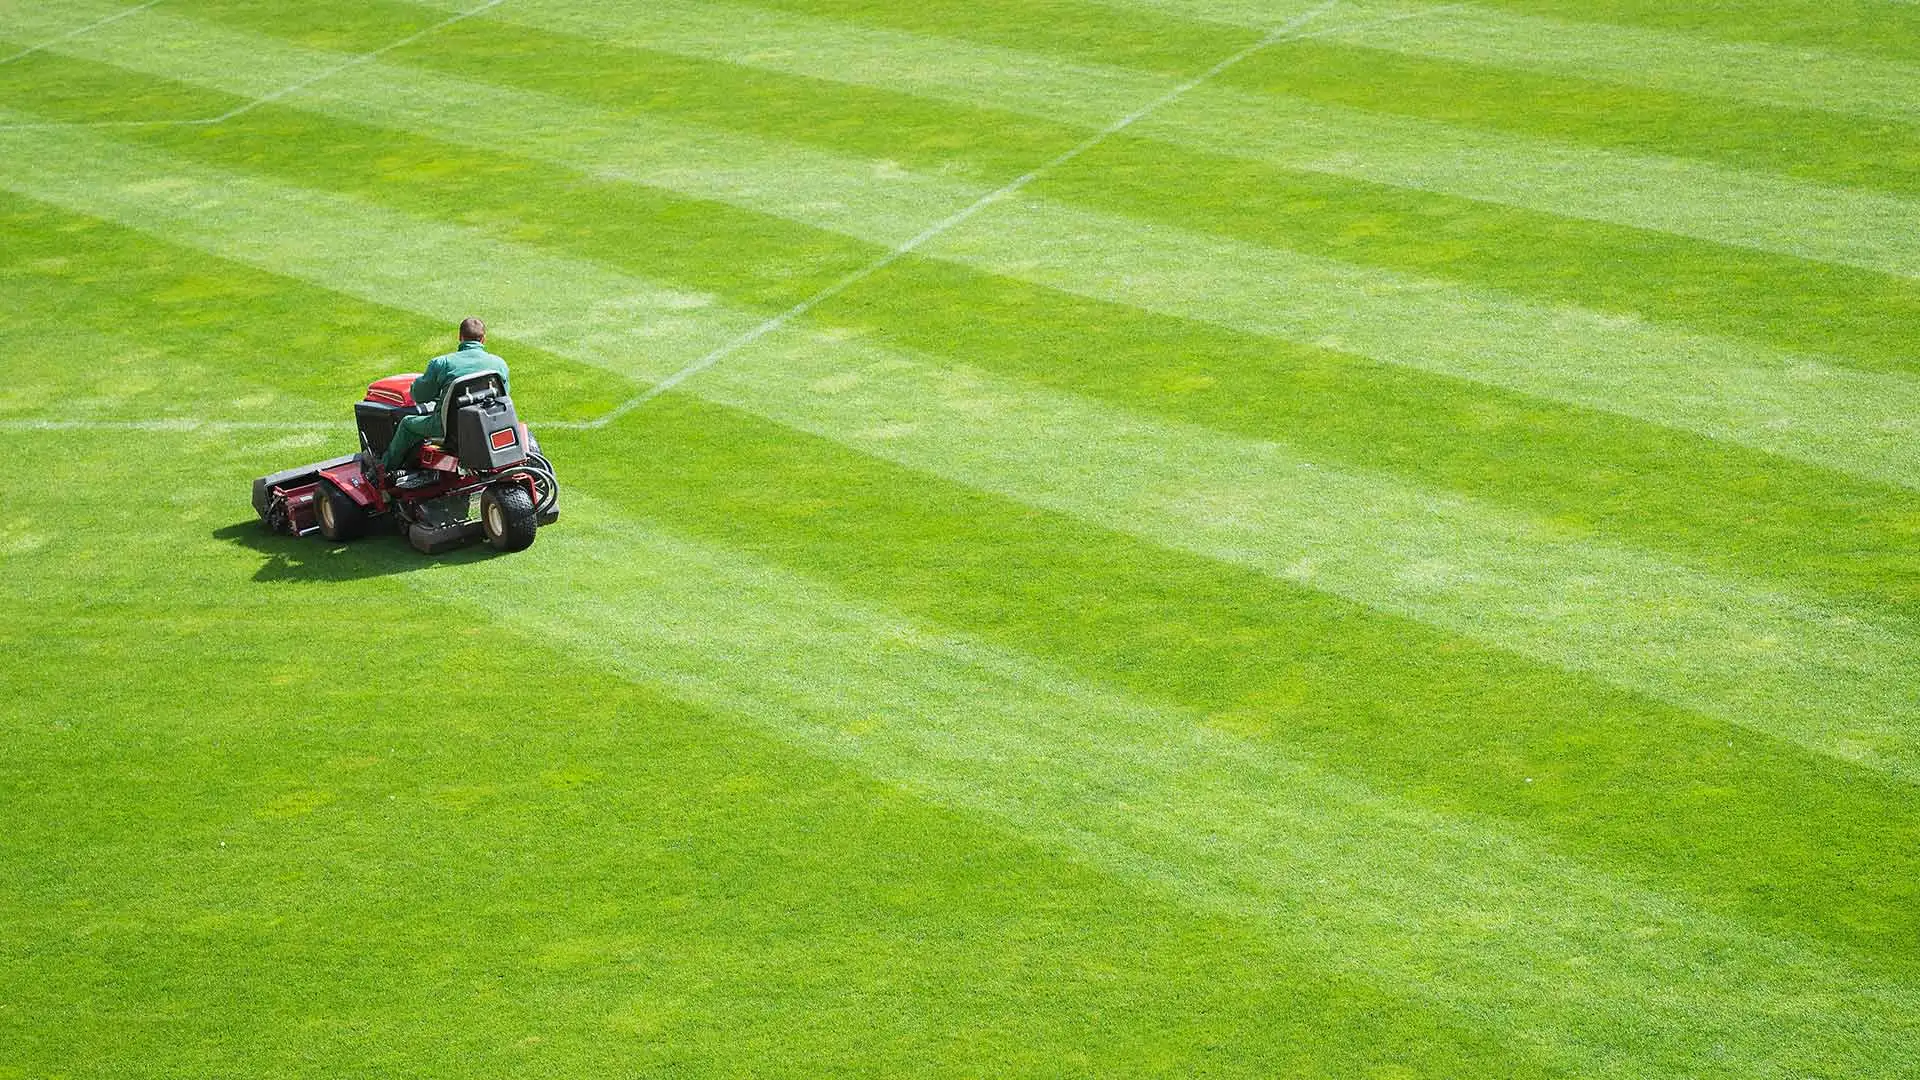 A man is aerating an athletic field with a large, riding aerator.